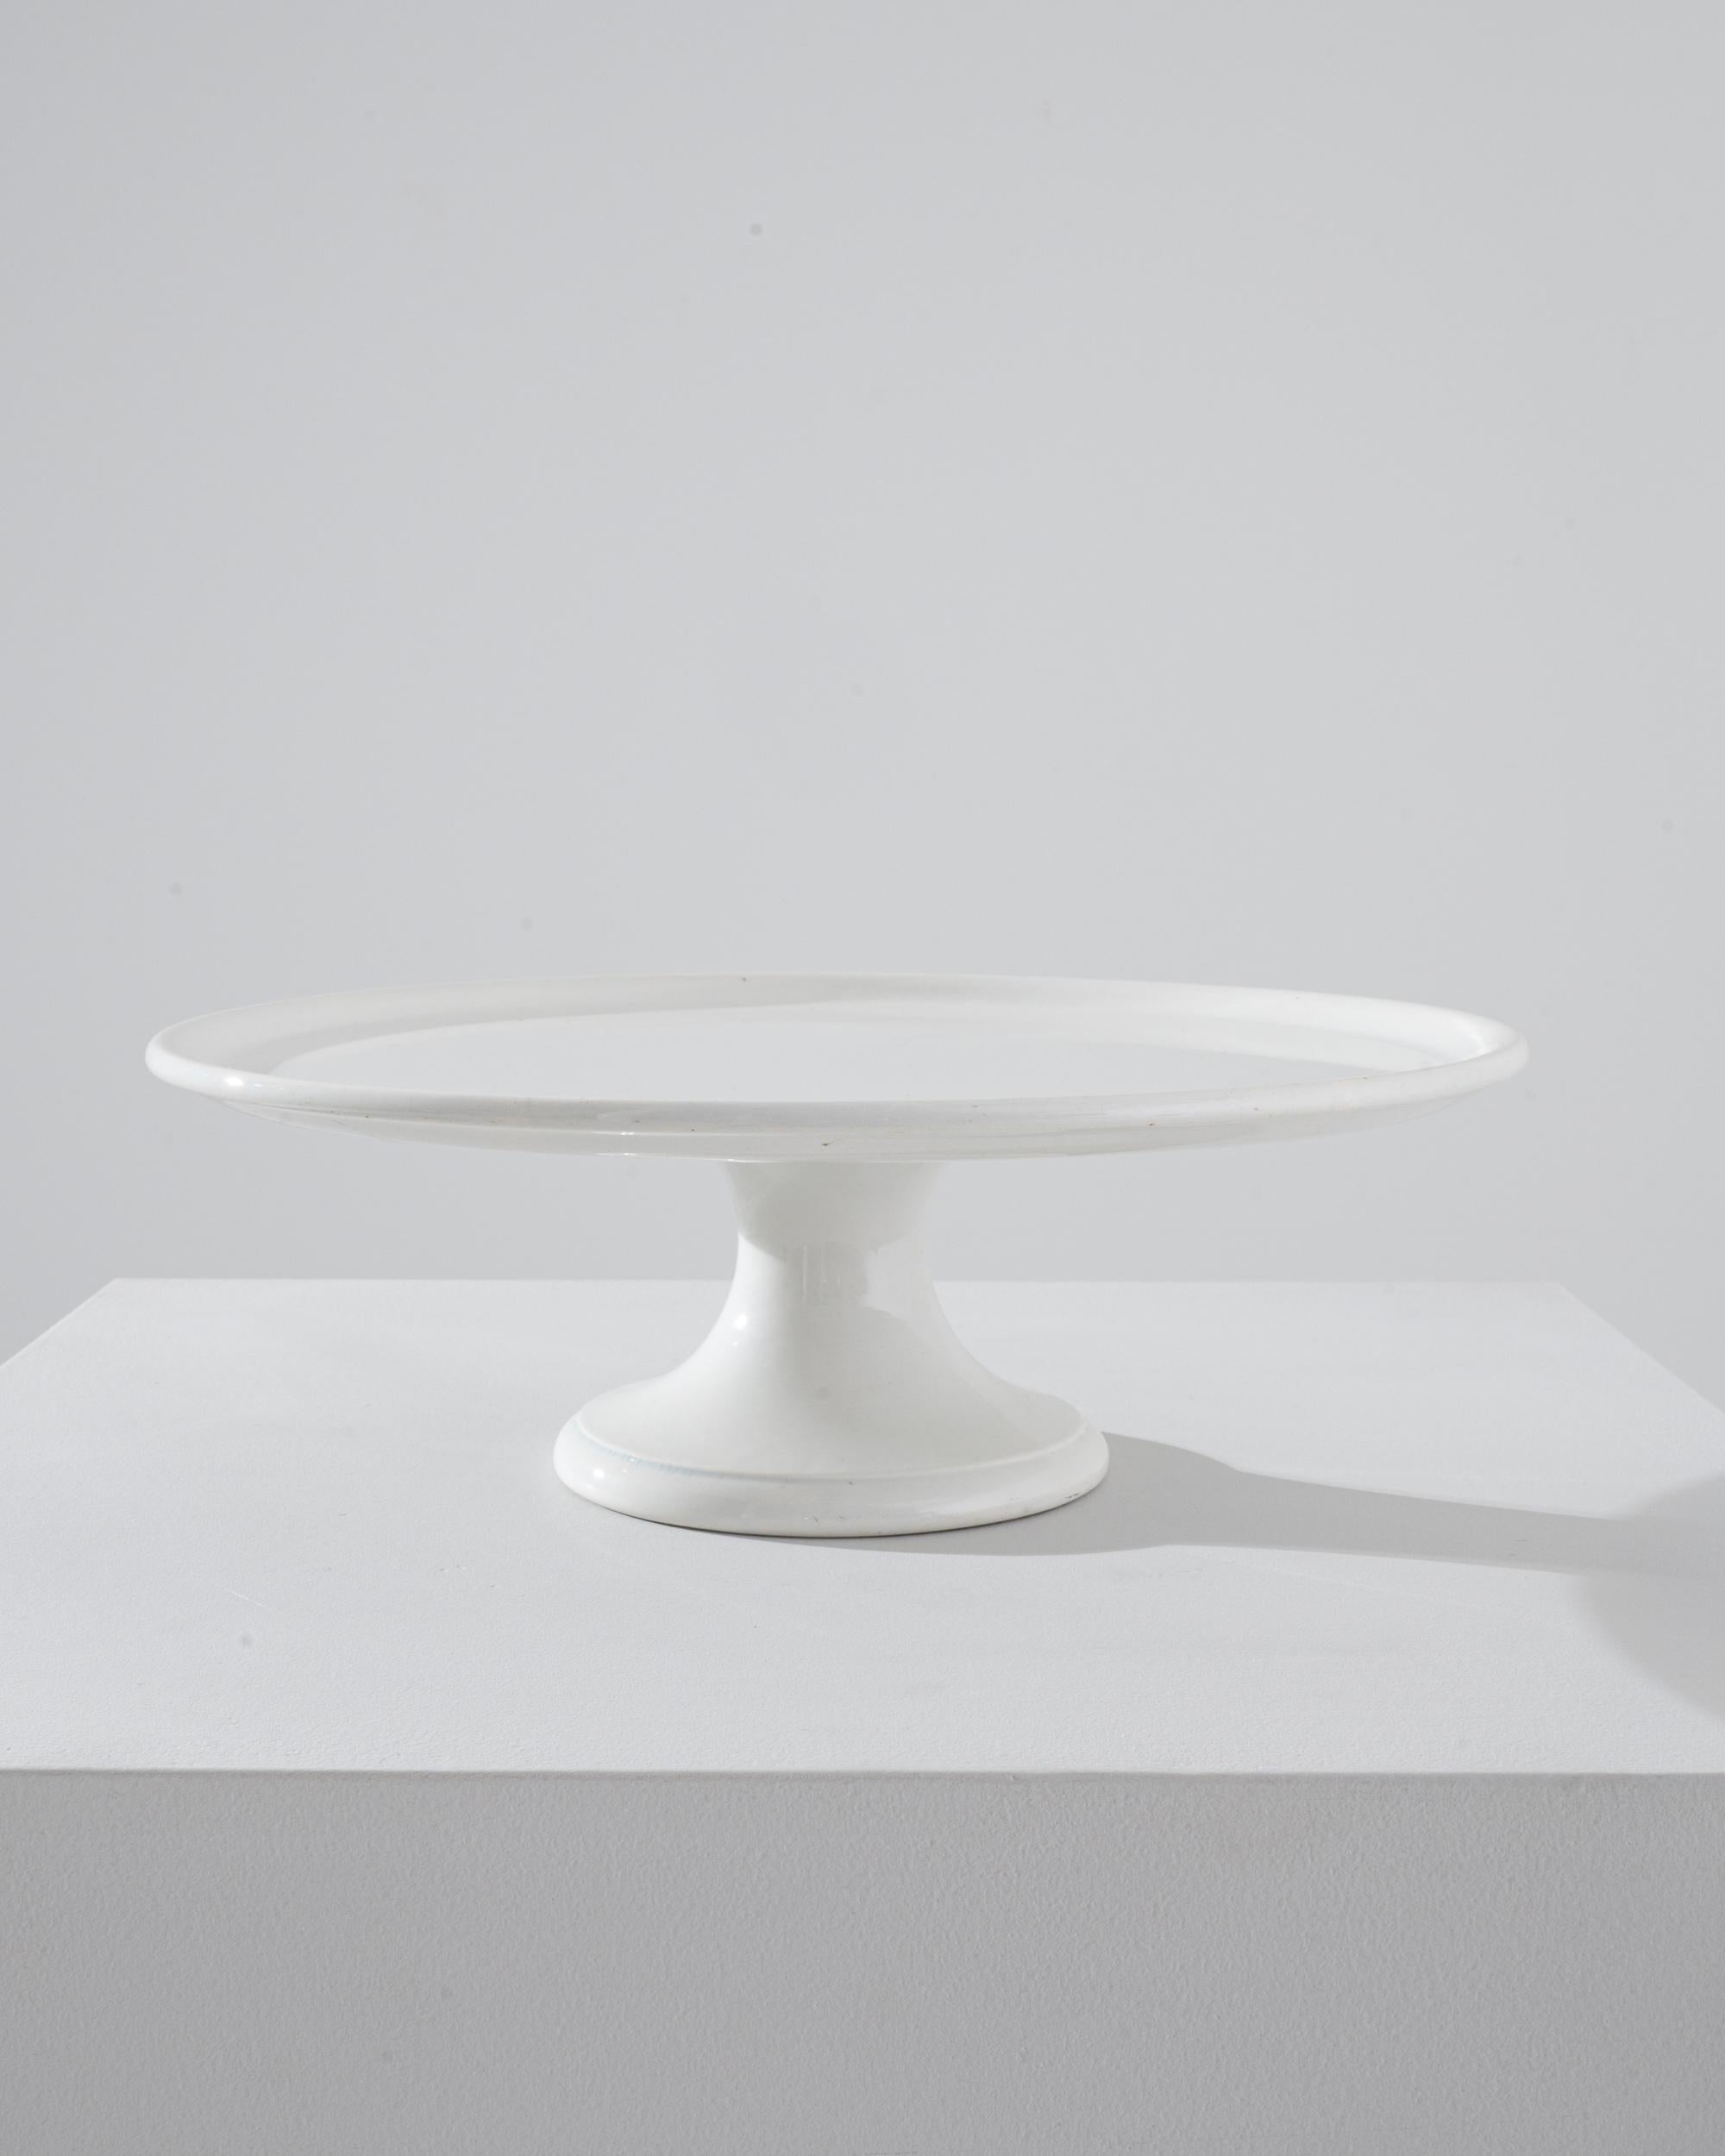 A ceramic cake tray from Belgium, produced circa 1900. A flat plane of circular ceramic coated in thick white glaze. With no unnecessary bells or whistles, this simple tray merely sits upon its stand and waits for cake. Only problem with this piece